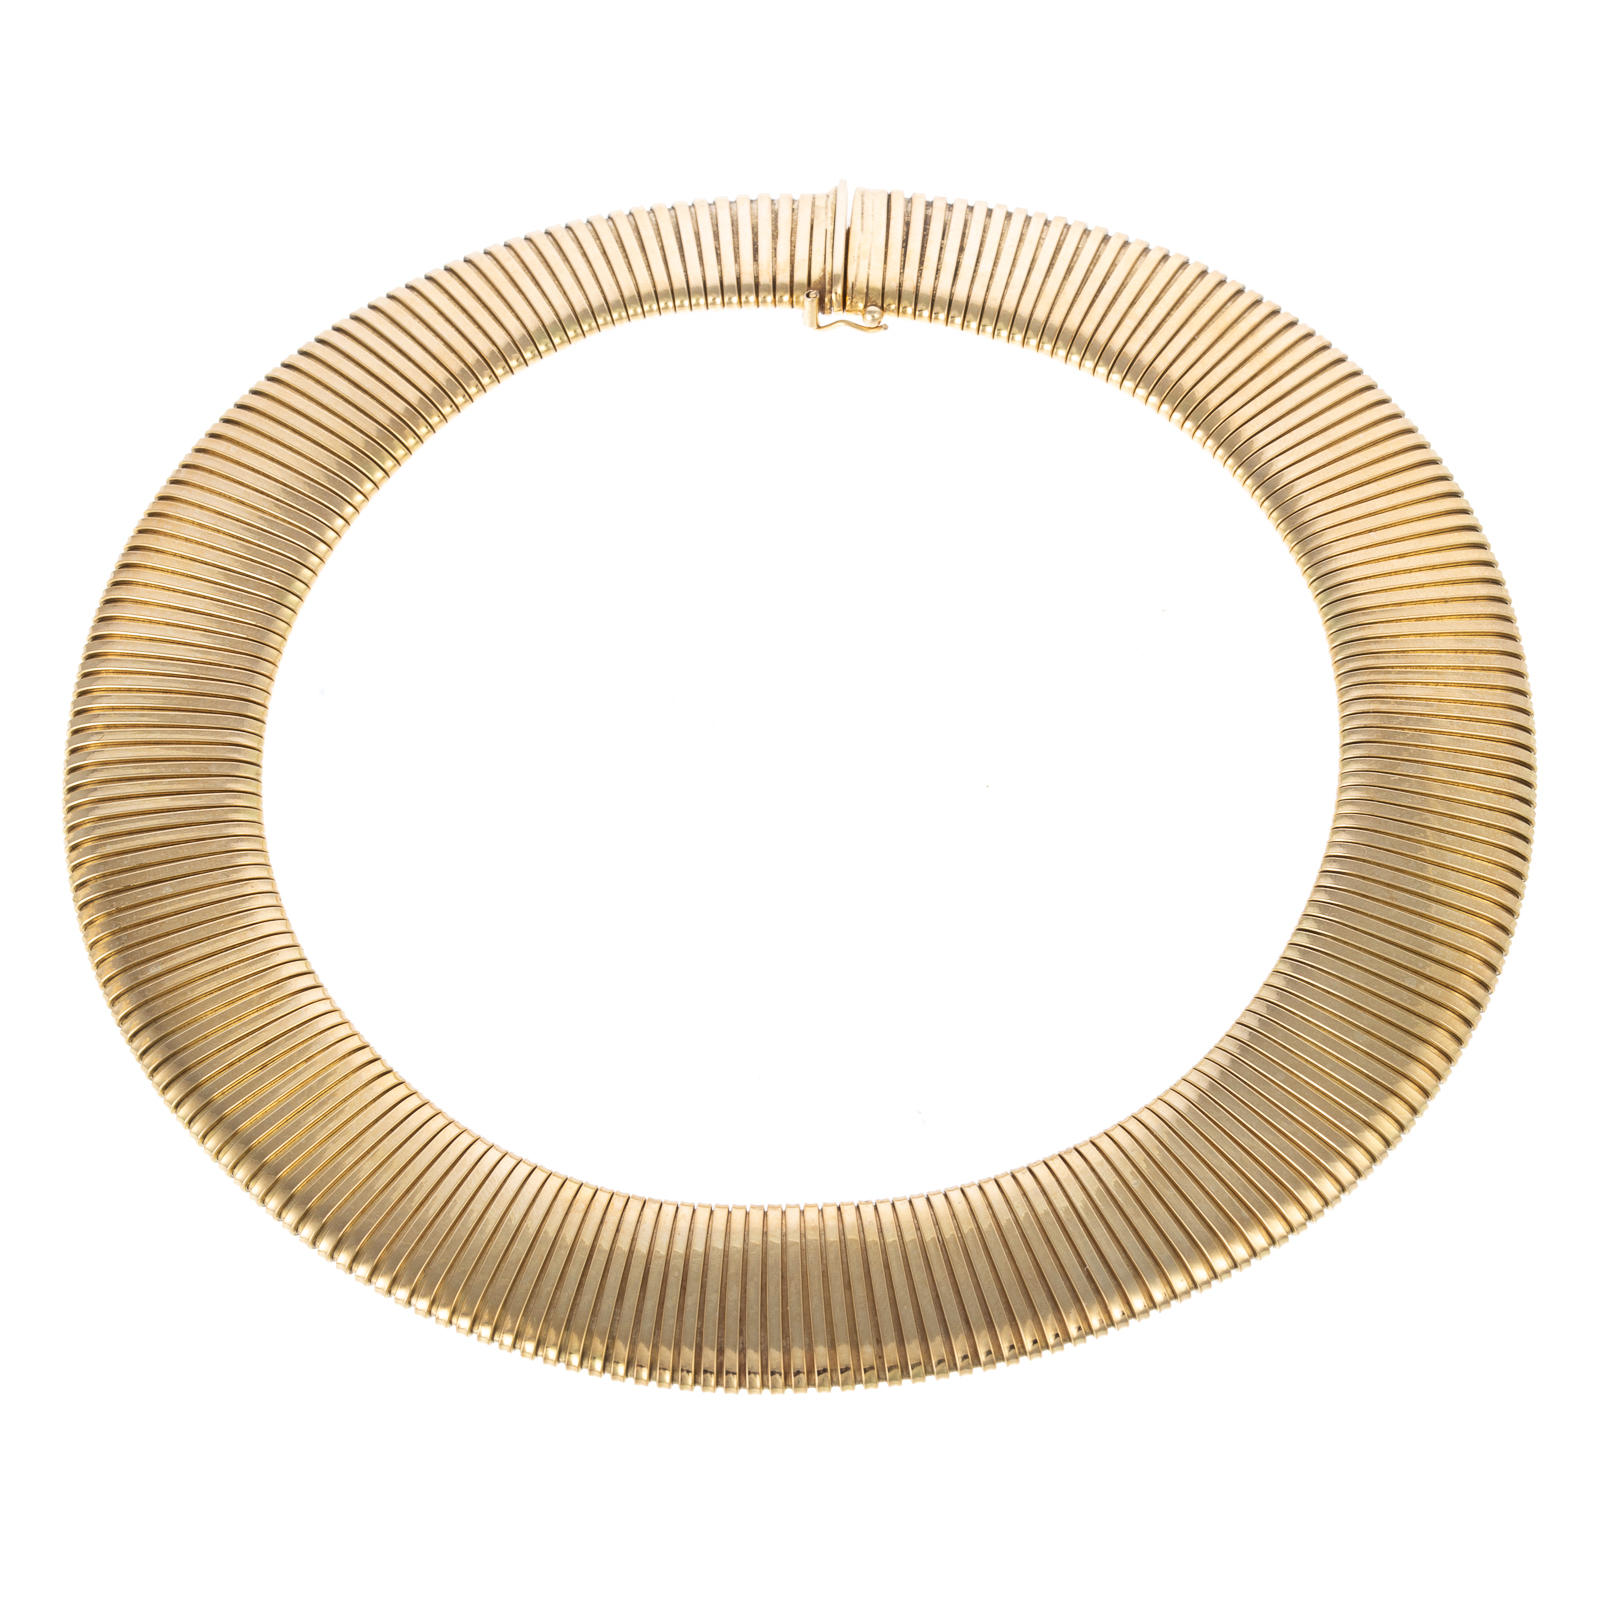 A WIDE FLEXIBLE NECKLACE IN 14K